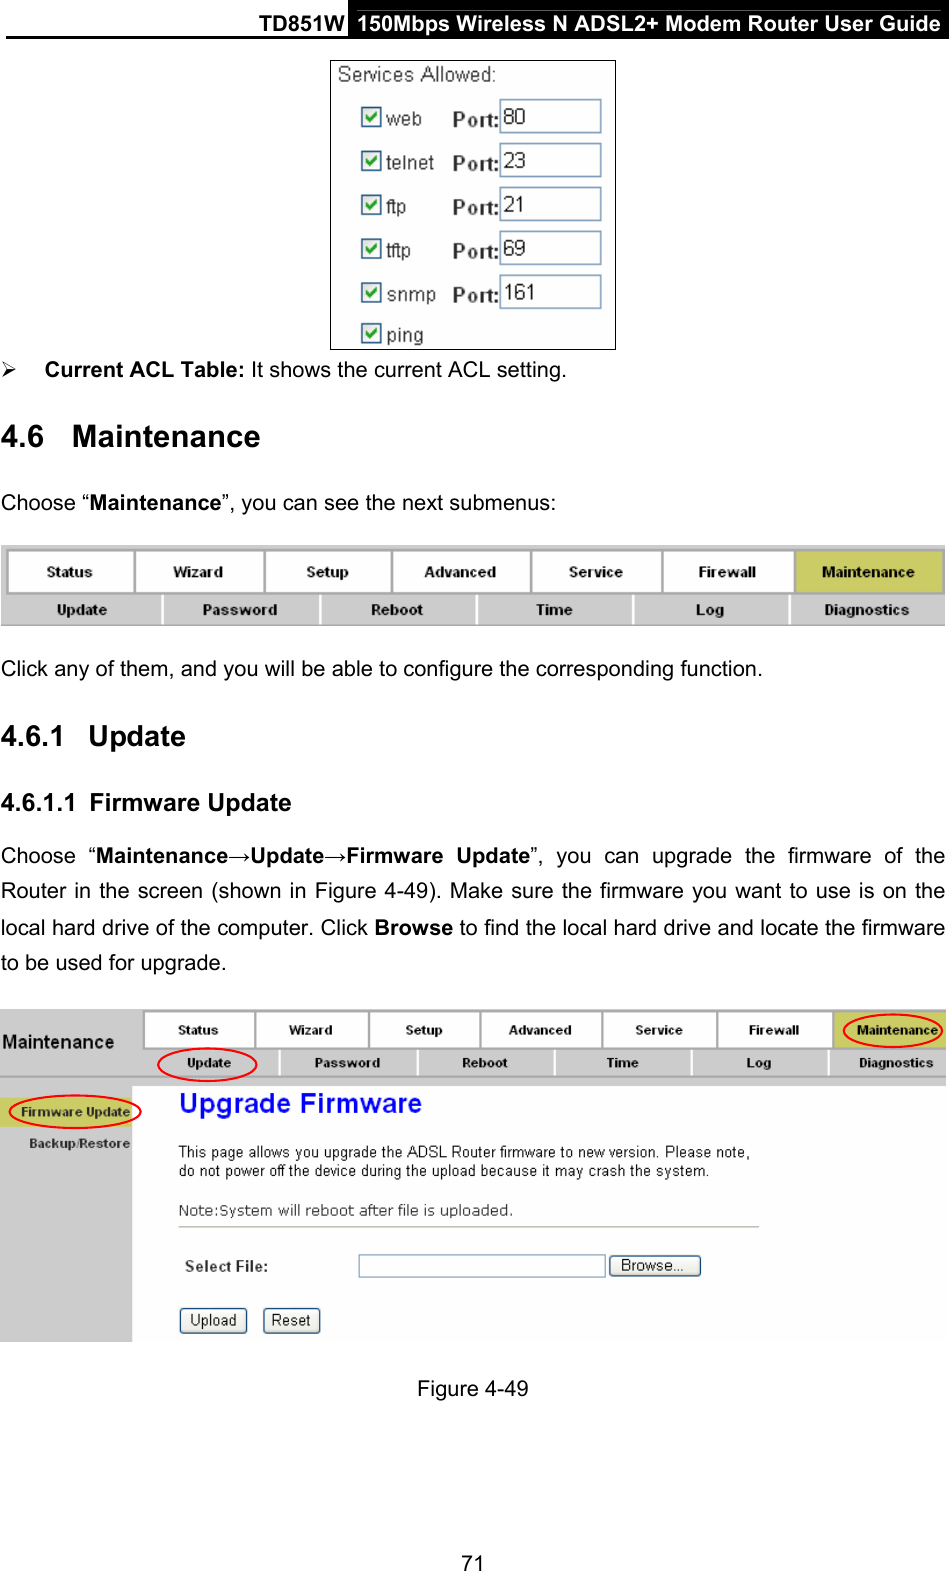 TD851W  150Mbps Wireless N ADSL2+ Modem Router User Guide  ¾ Current ACL Table: It shows the current ACL setting. 4.6  Maintenance Choose “Maintenance”, you can see the next submenus:  Click any of them, and you will be able to configure the corresponding function. 4.6.1  Update 4.6.1.1  Firmware Update Choose “Maintenance→Update→Firmware Update”, you can upgrade the firmware of the Router in the screen (shown in Figure 4-49). Make sure the firmware you want to use is on the local hard drive of the computer. Click Browse to find the local hard drive and locate the firmware to be used for upgrade.  Figure 4-49 71 